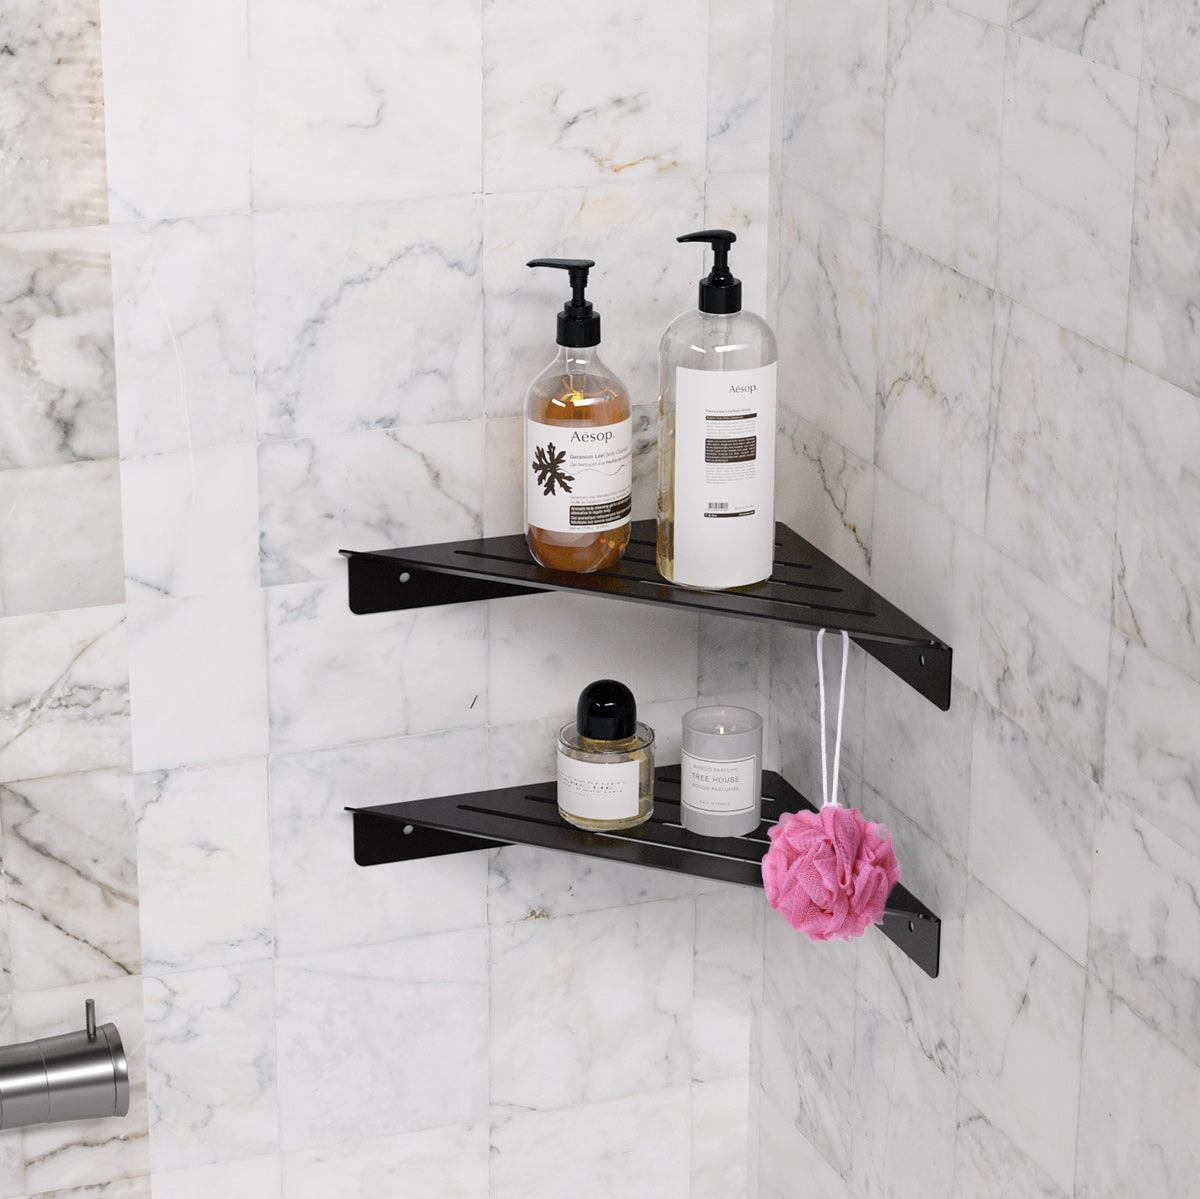 Stainless Steel Shower Shelf, Wall (Brushed)